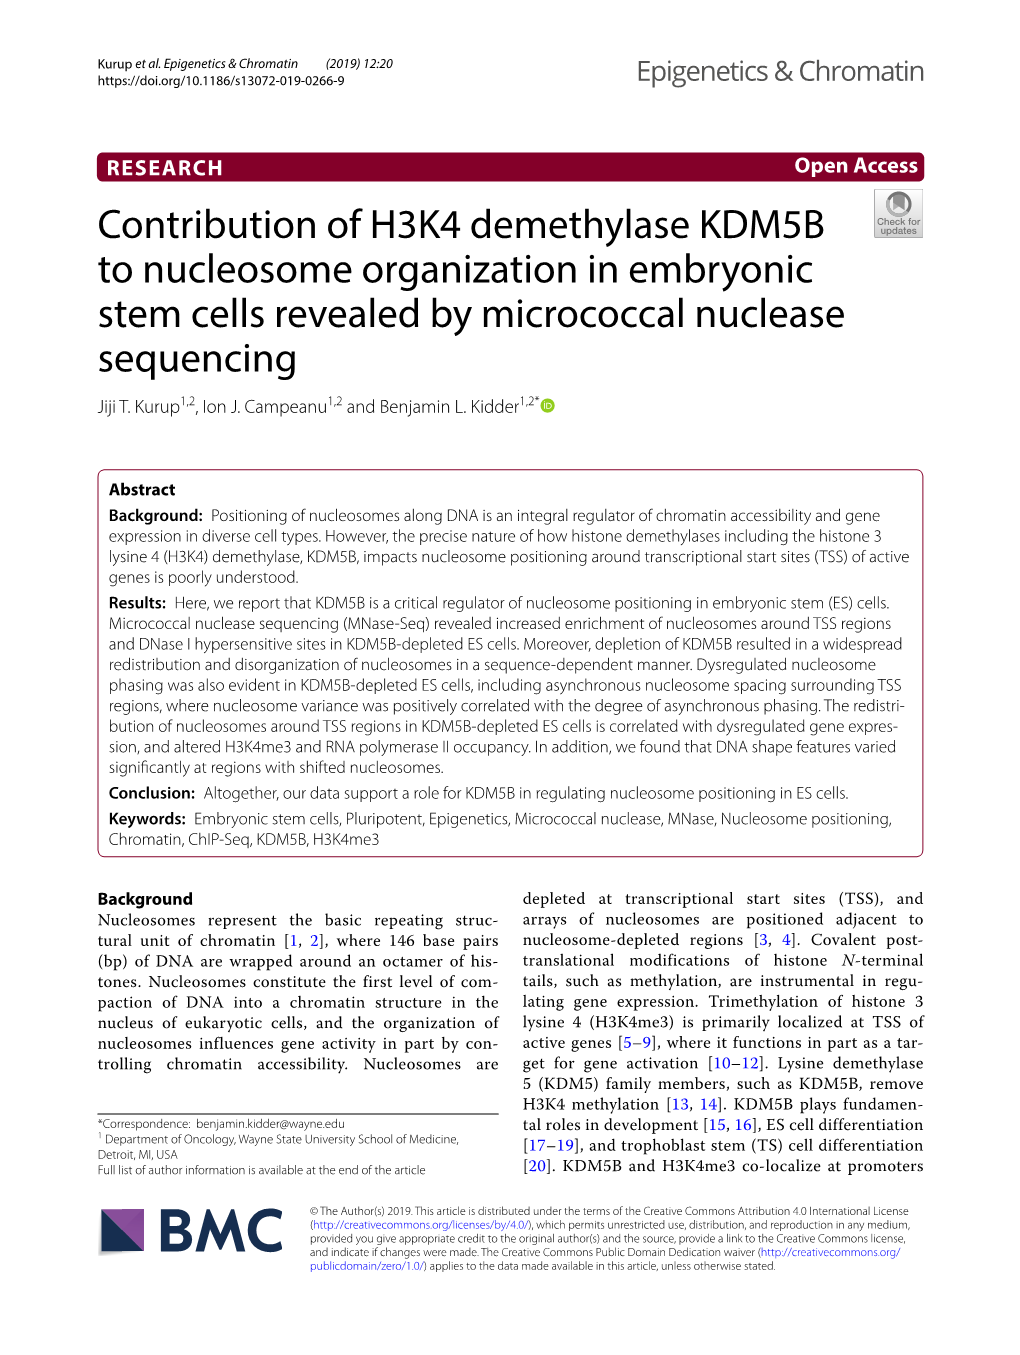 Contribution of H3K4 Demethylase KDM5B to Nucleosome Organization in Embryonic Stem Cells Revealed by Micrococcal Nuclease Sequencing Jiji T